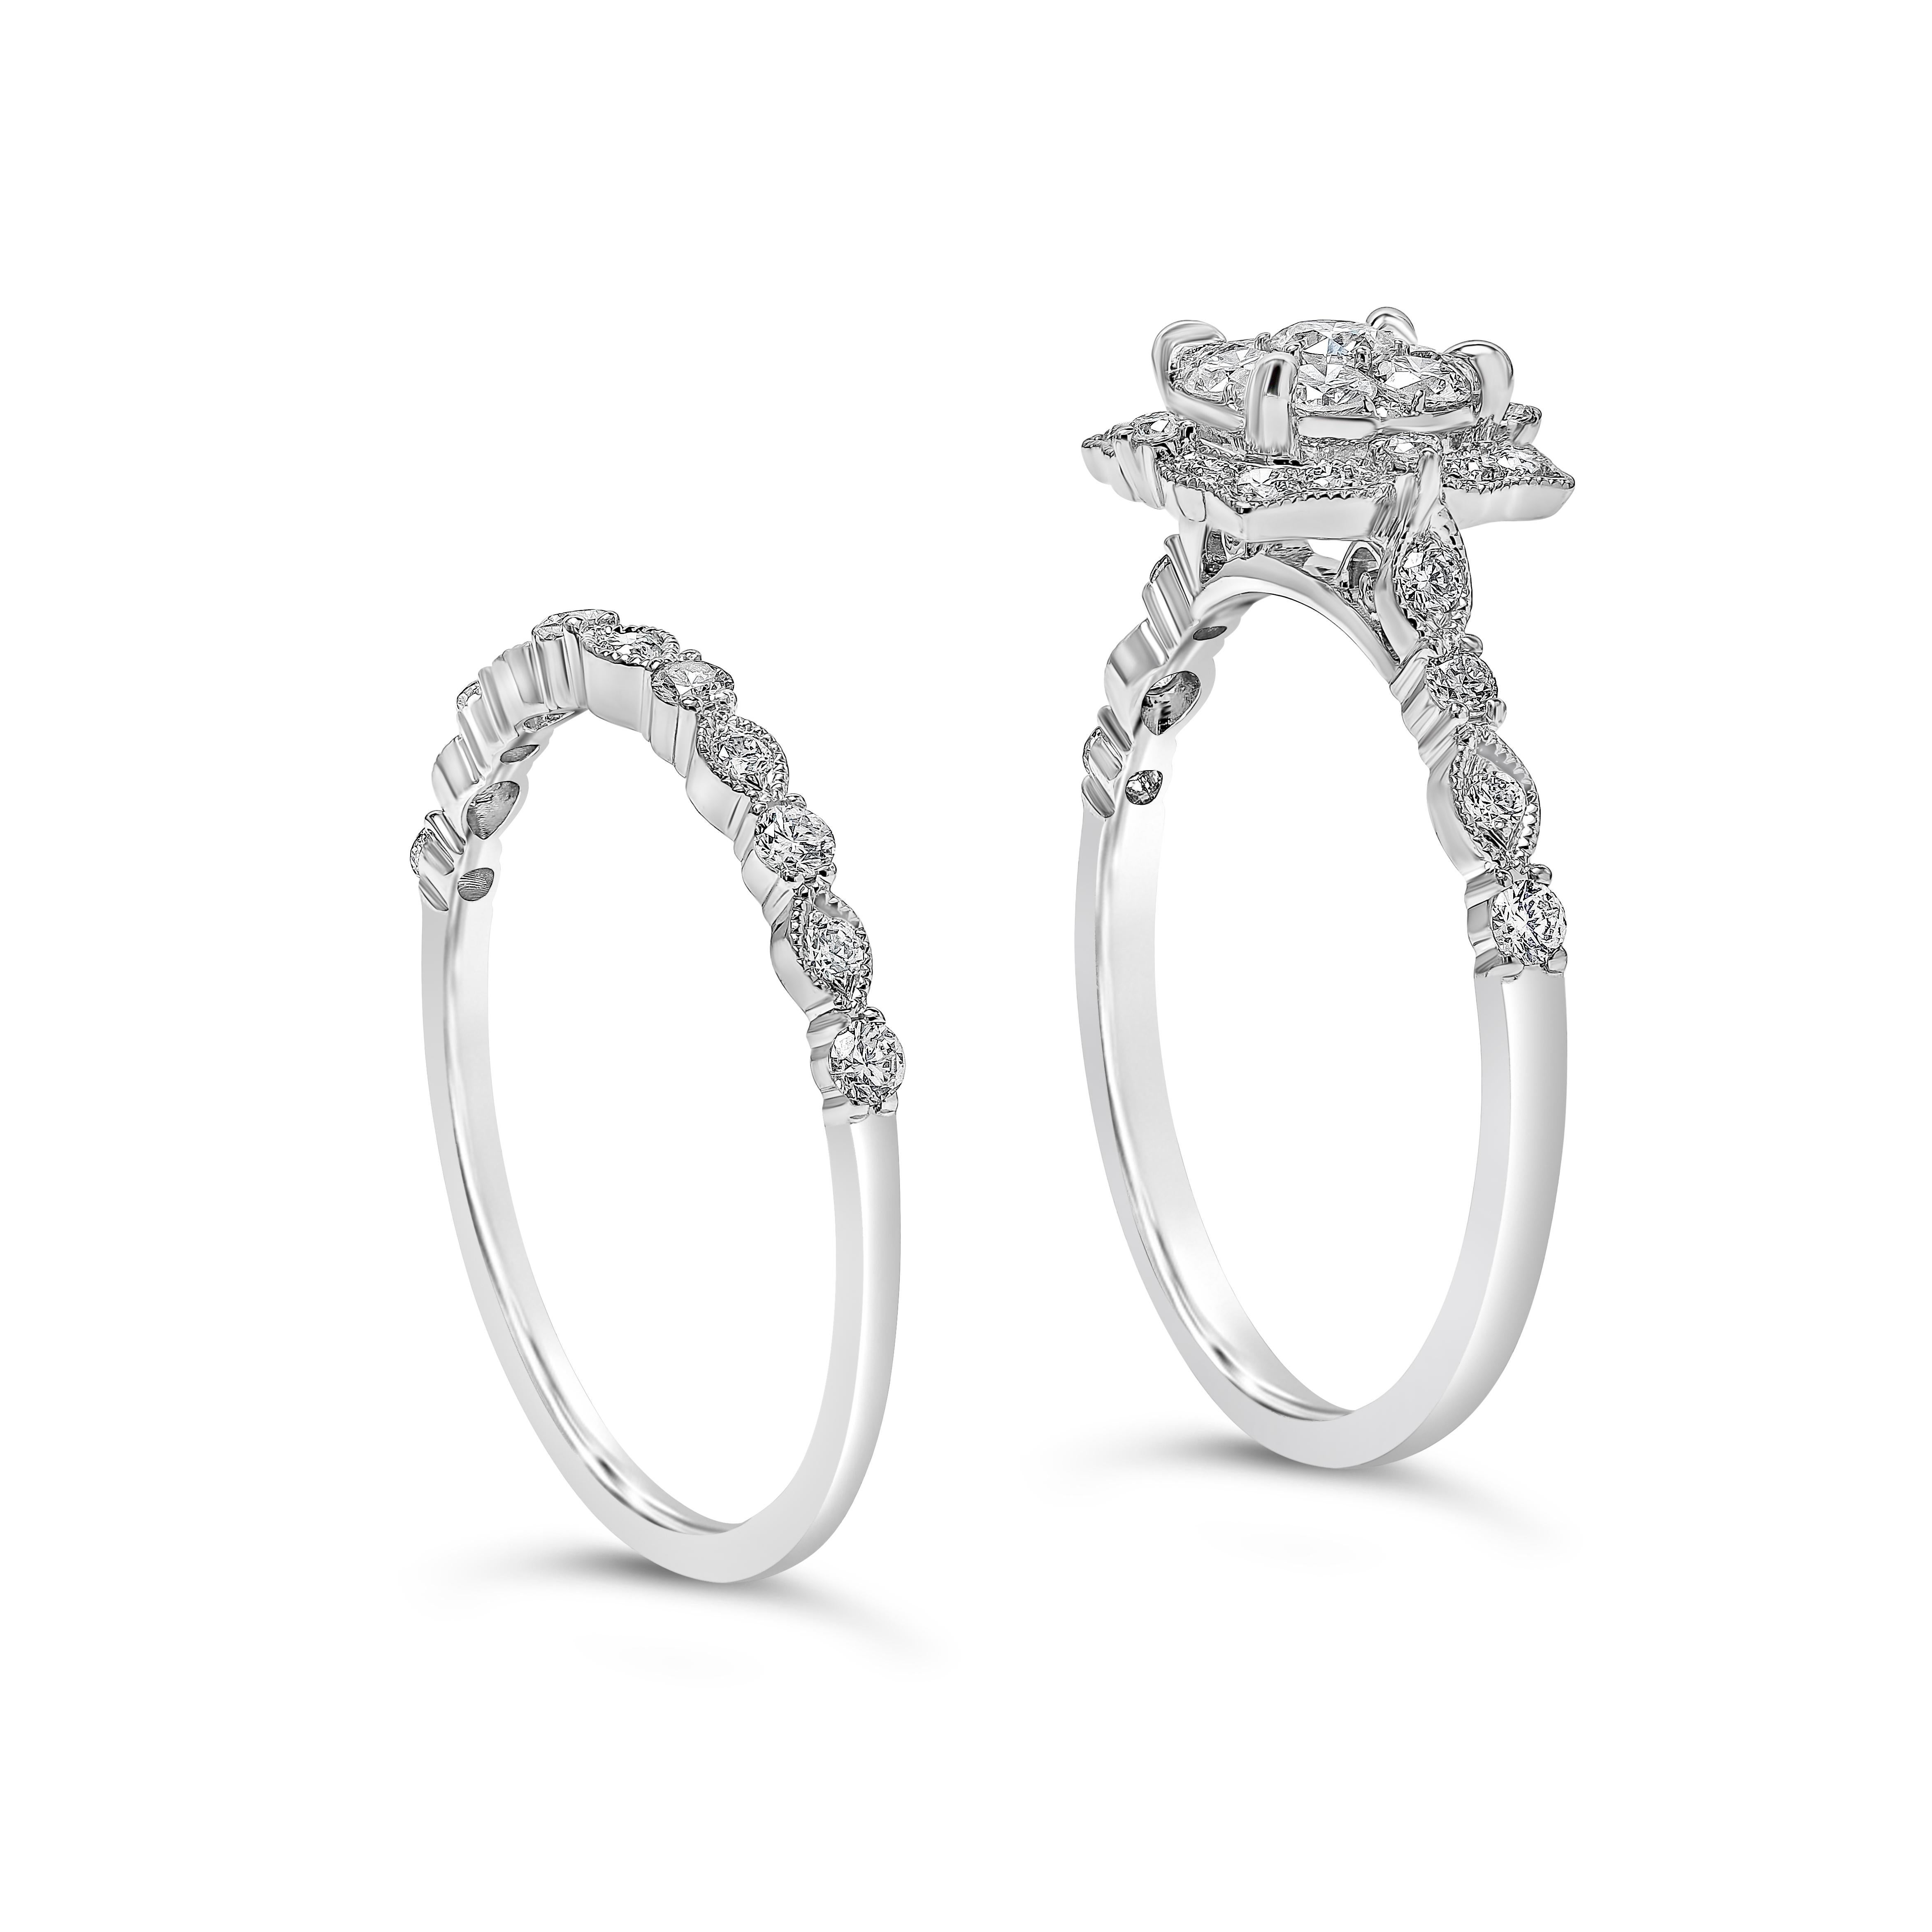 A unique engagement ring and wedding band set. The engagement ring features a cluster of round cut diamonds, surrounded by a halo in an intricate design. Accompanied with a matching wedding band. Both rings have a diamond encrusted shank in a